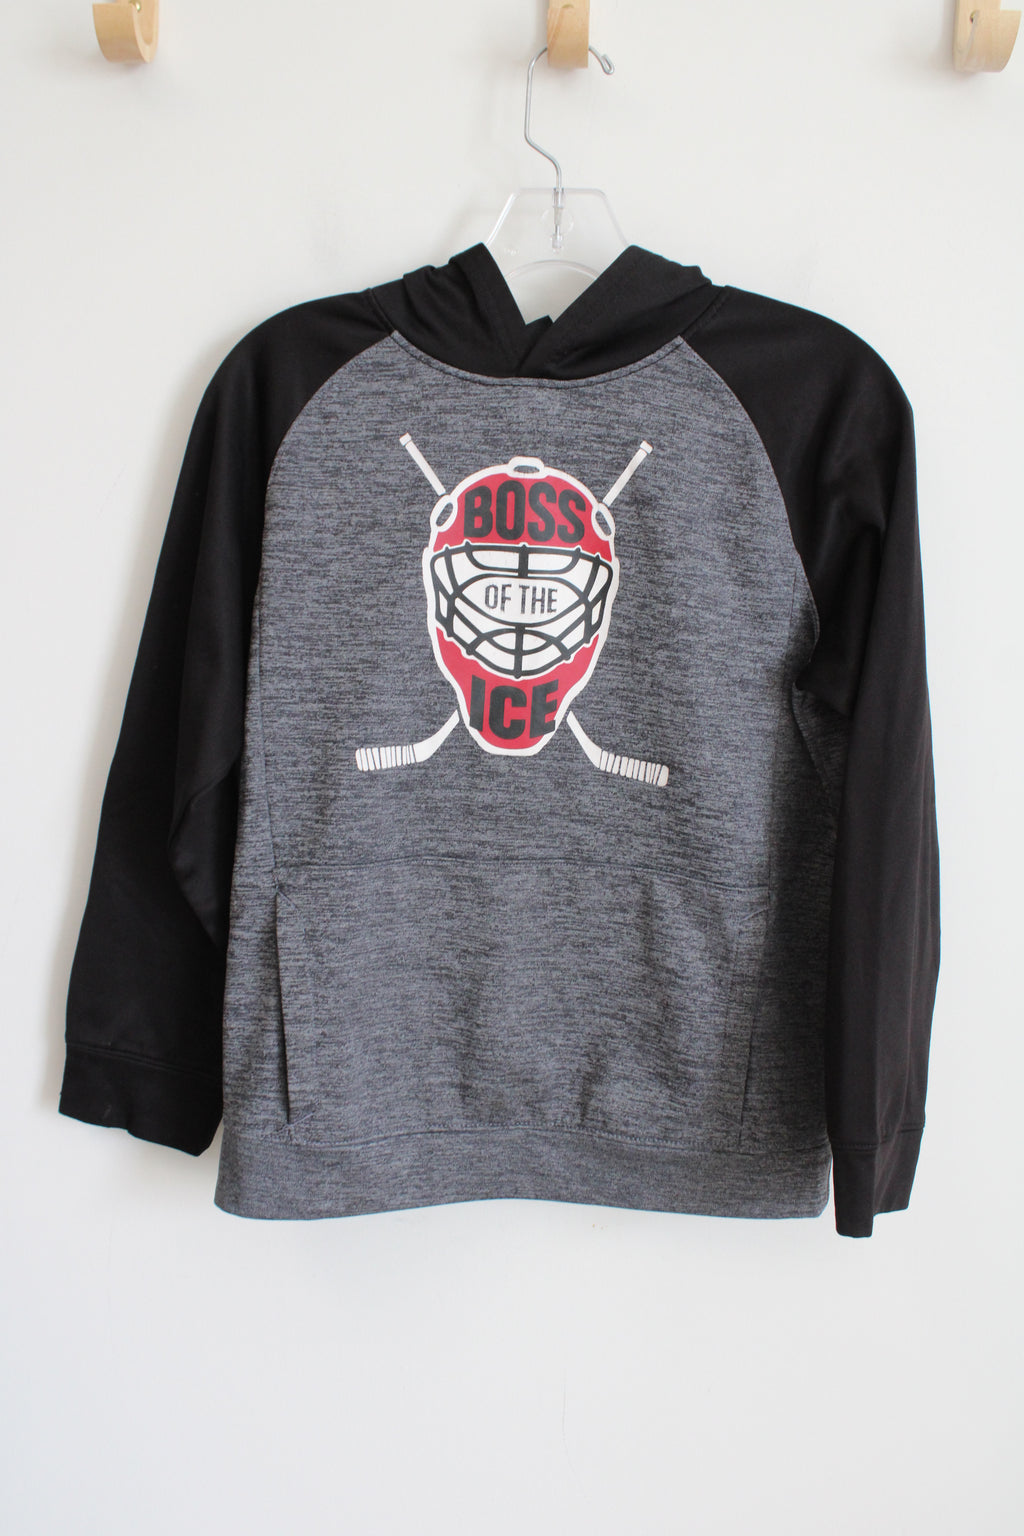 Children's Place Sport Boss Of The Ice Hoodie | Youth 10/12